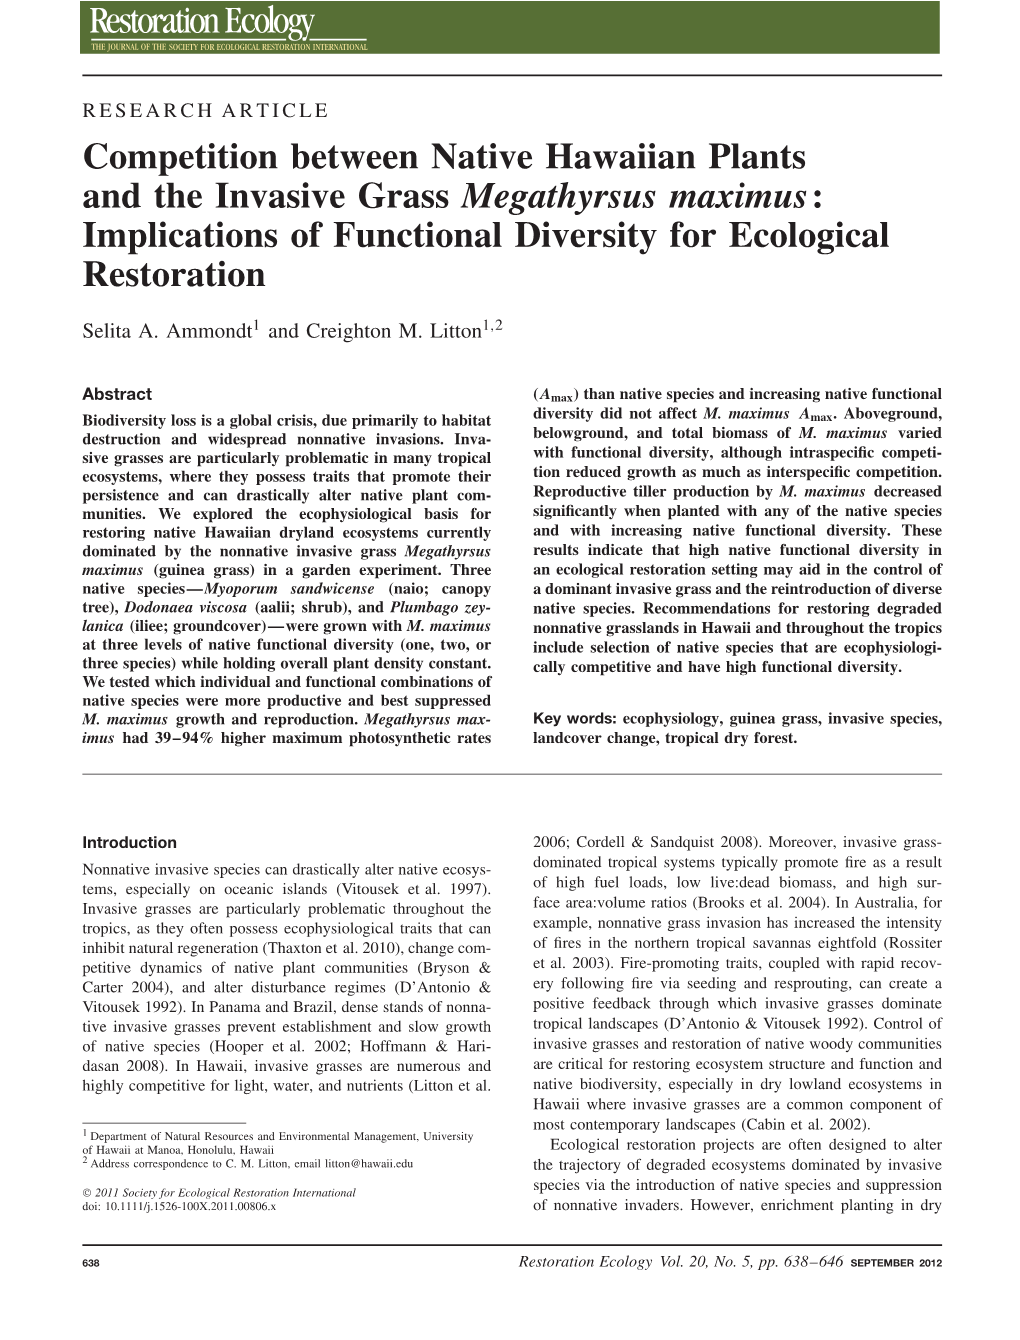 Competition Between Native Hawaiian Plants and the Invasive Grass Megathyrsus Maximus: Implications of Functional Diversity for Ecological Restoration